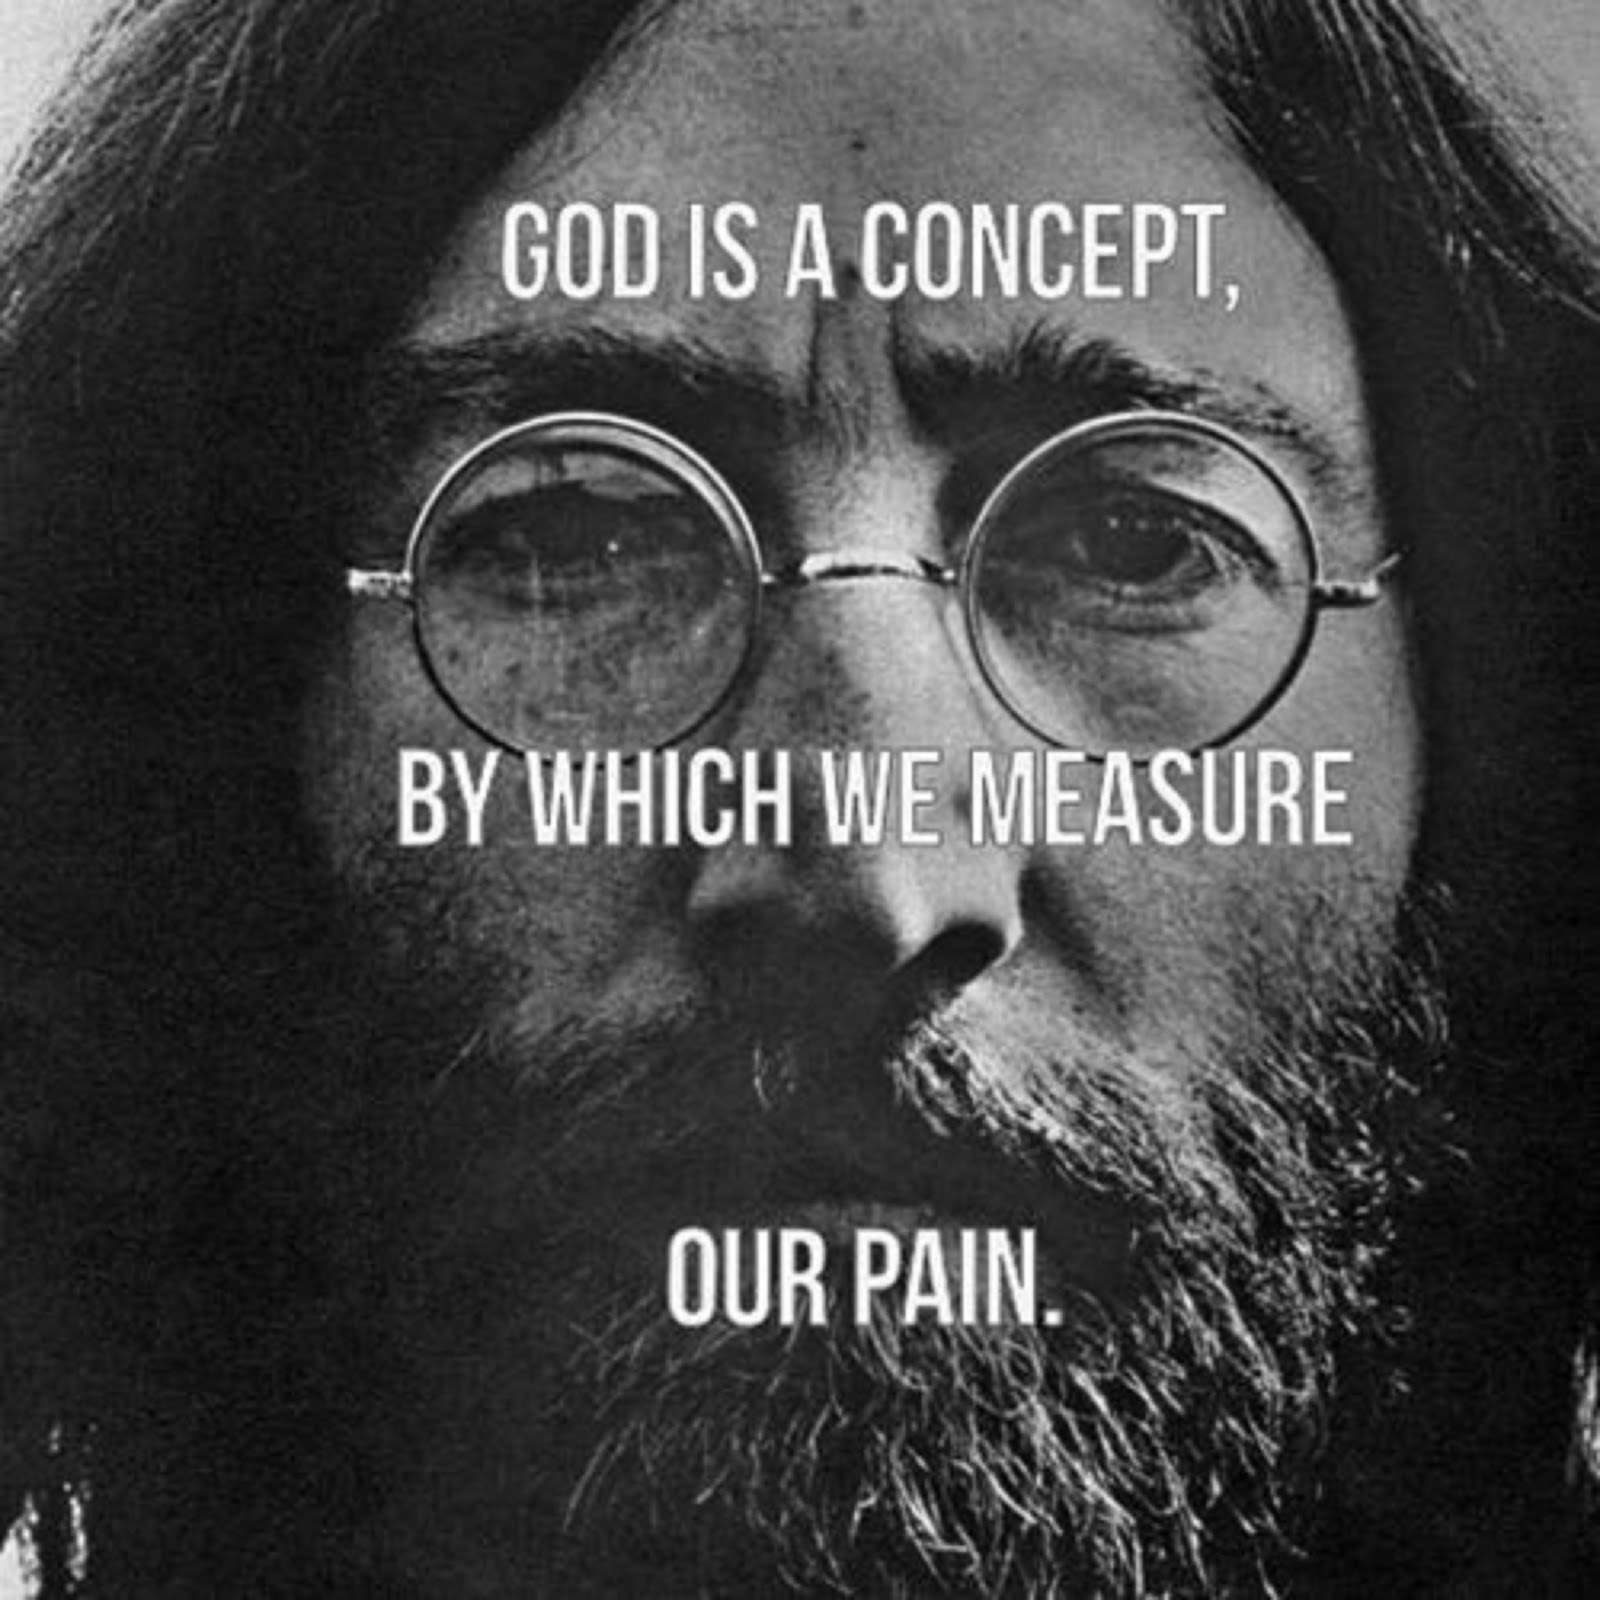 BEATLE JOHN LENNON  - "GOD IS A CONCEPT BY WHICH WE MEASURE OUR PAIN"